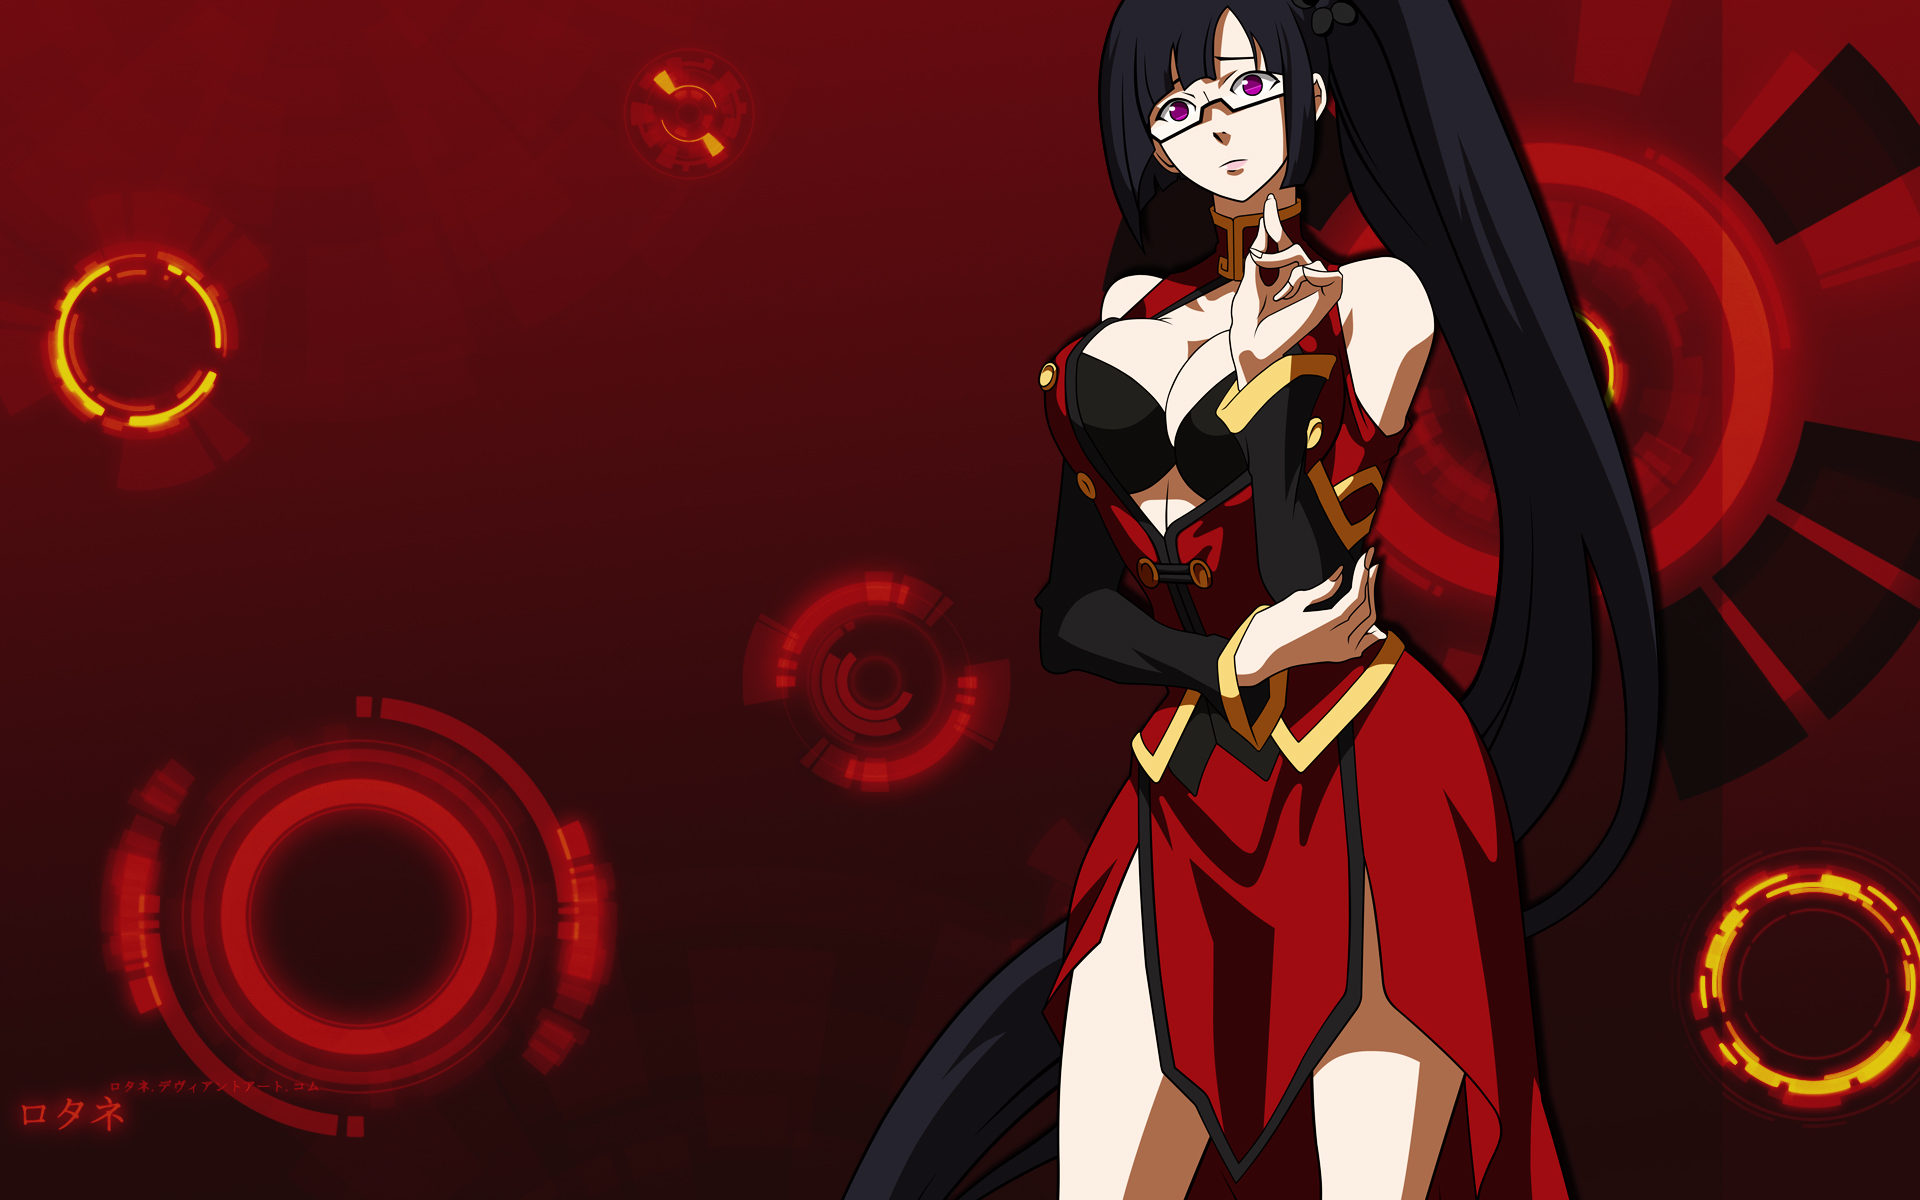 Litchi Faye Ling - BlazBlue character from the game Calamity Trigger.